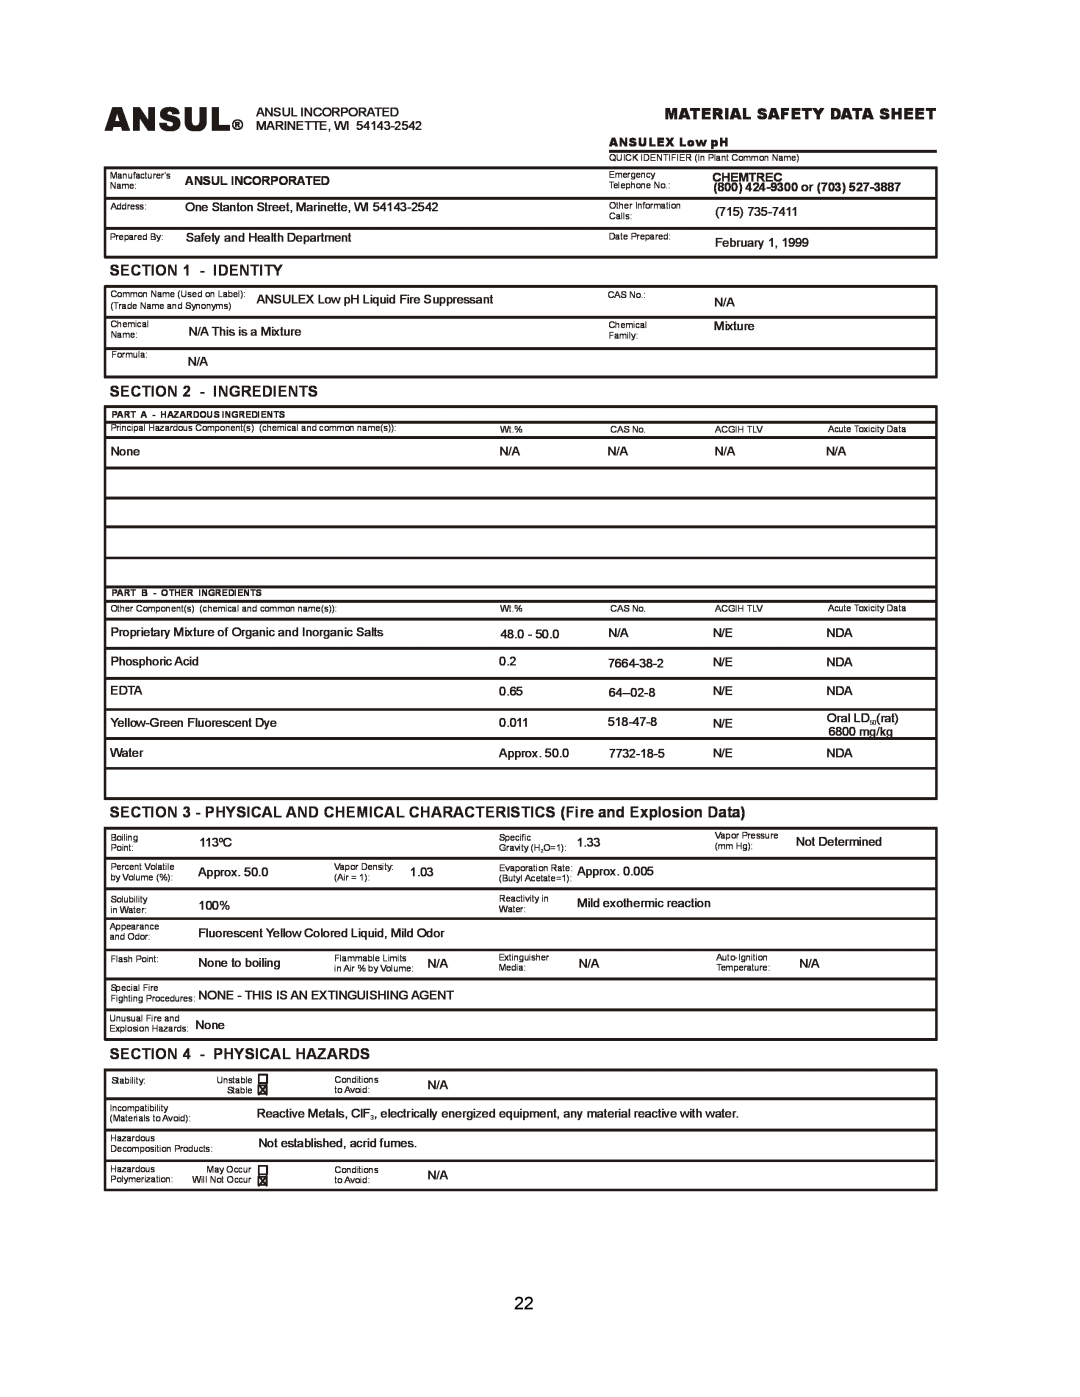 Wells WVG-136, WVG-136RW Ansul, Identity, Ingredients, Physical Hazards, Material Safety Data Sheet, ANSULEX Low pH 